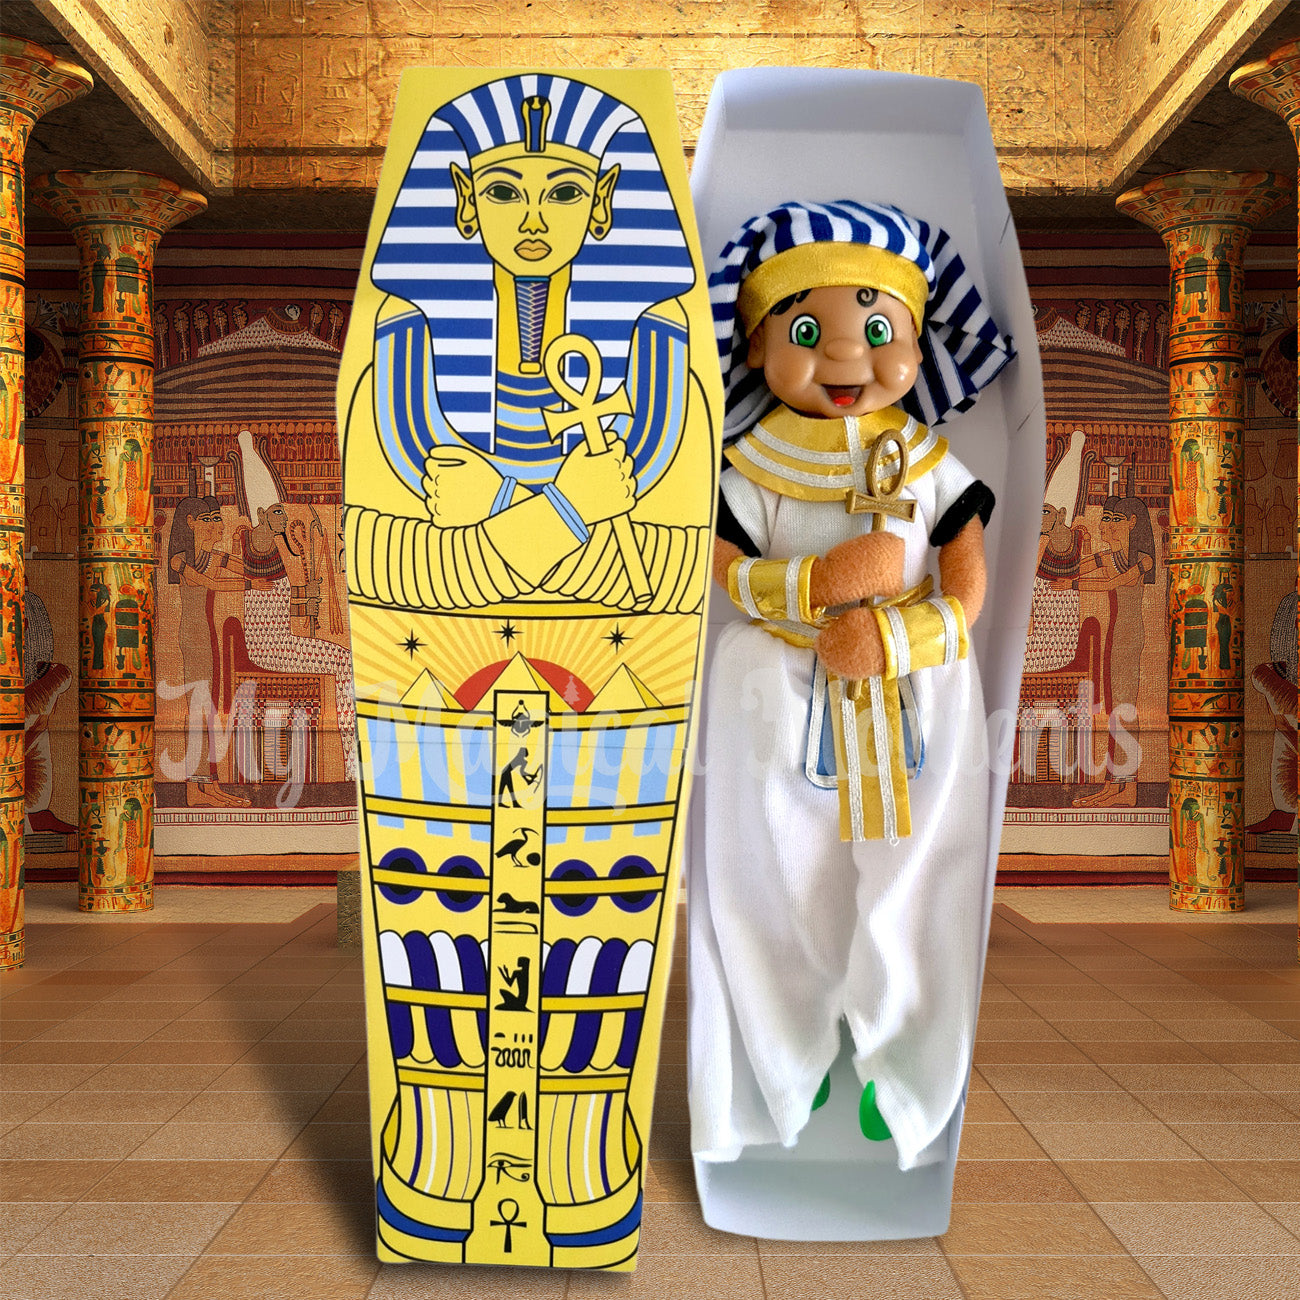 Egyptian elf in an ancientsarcophagus tomb